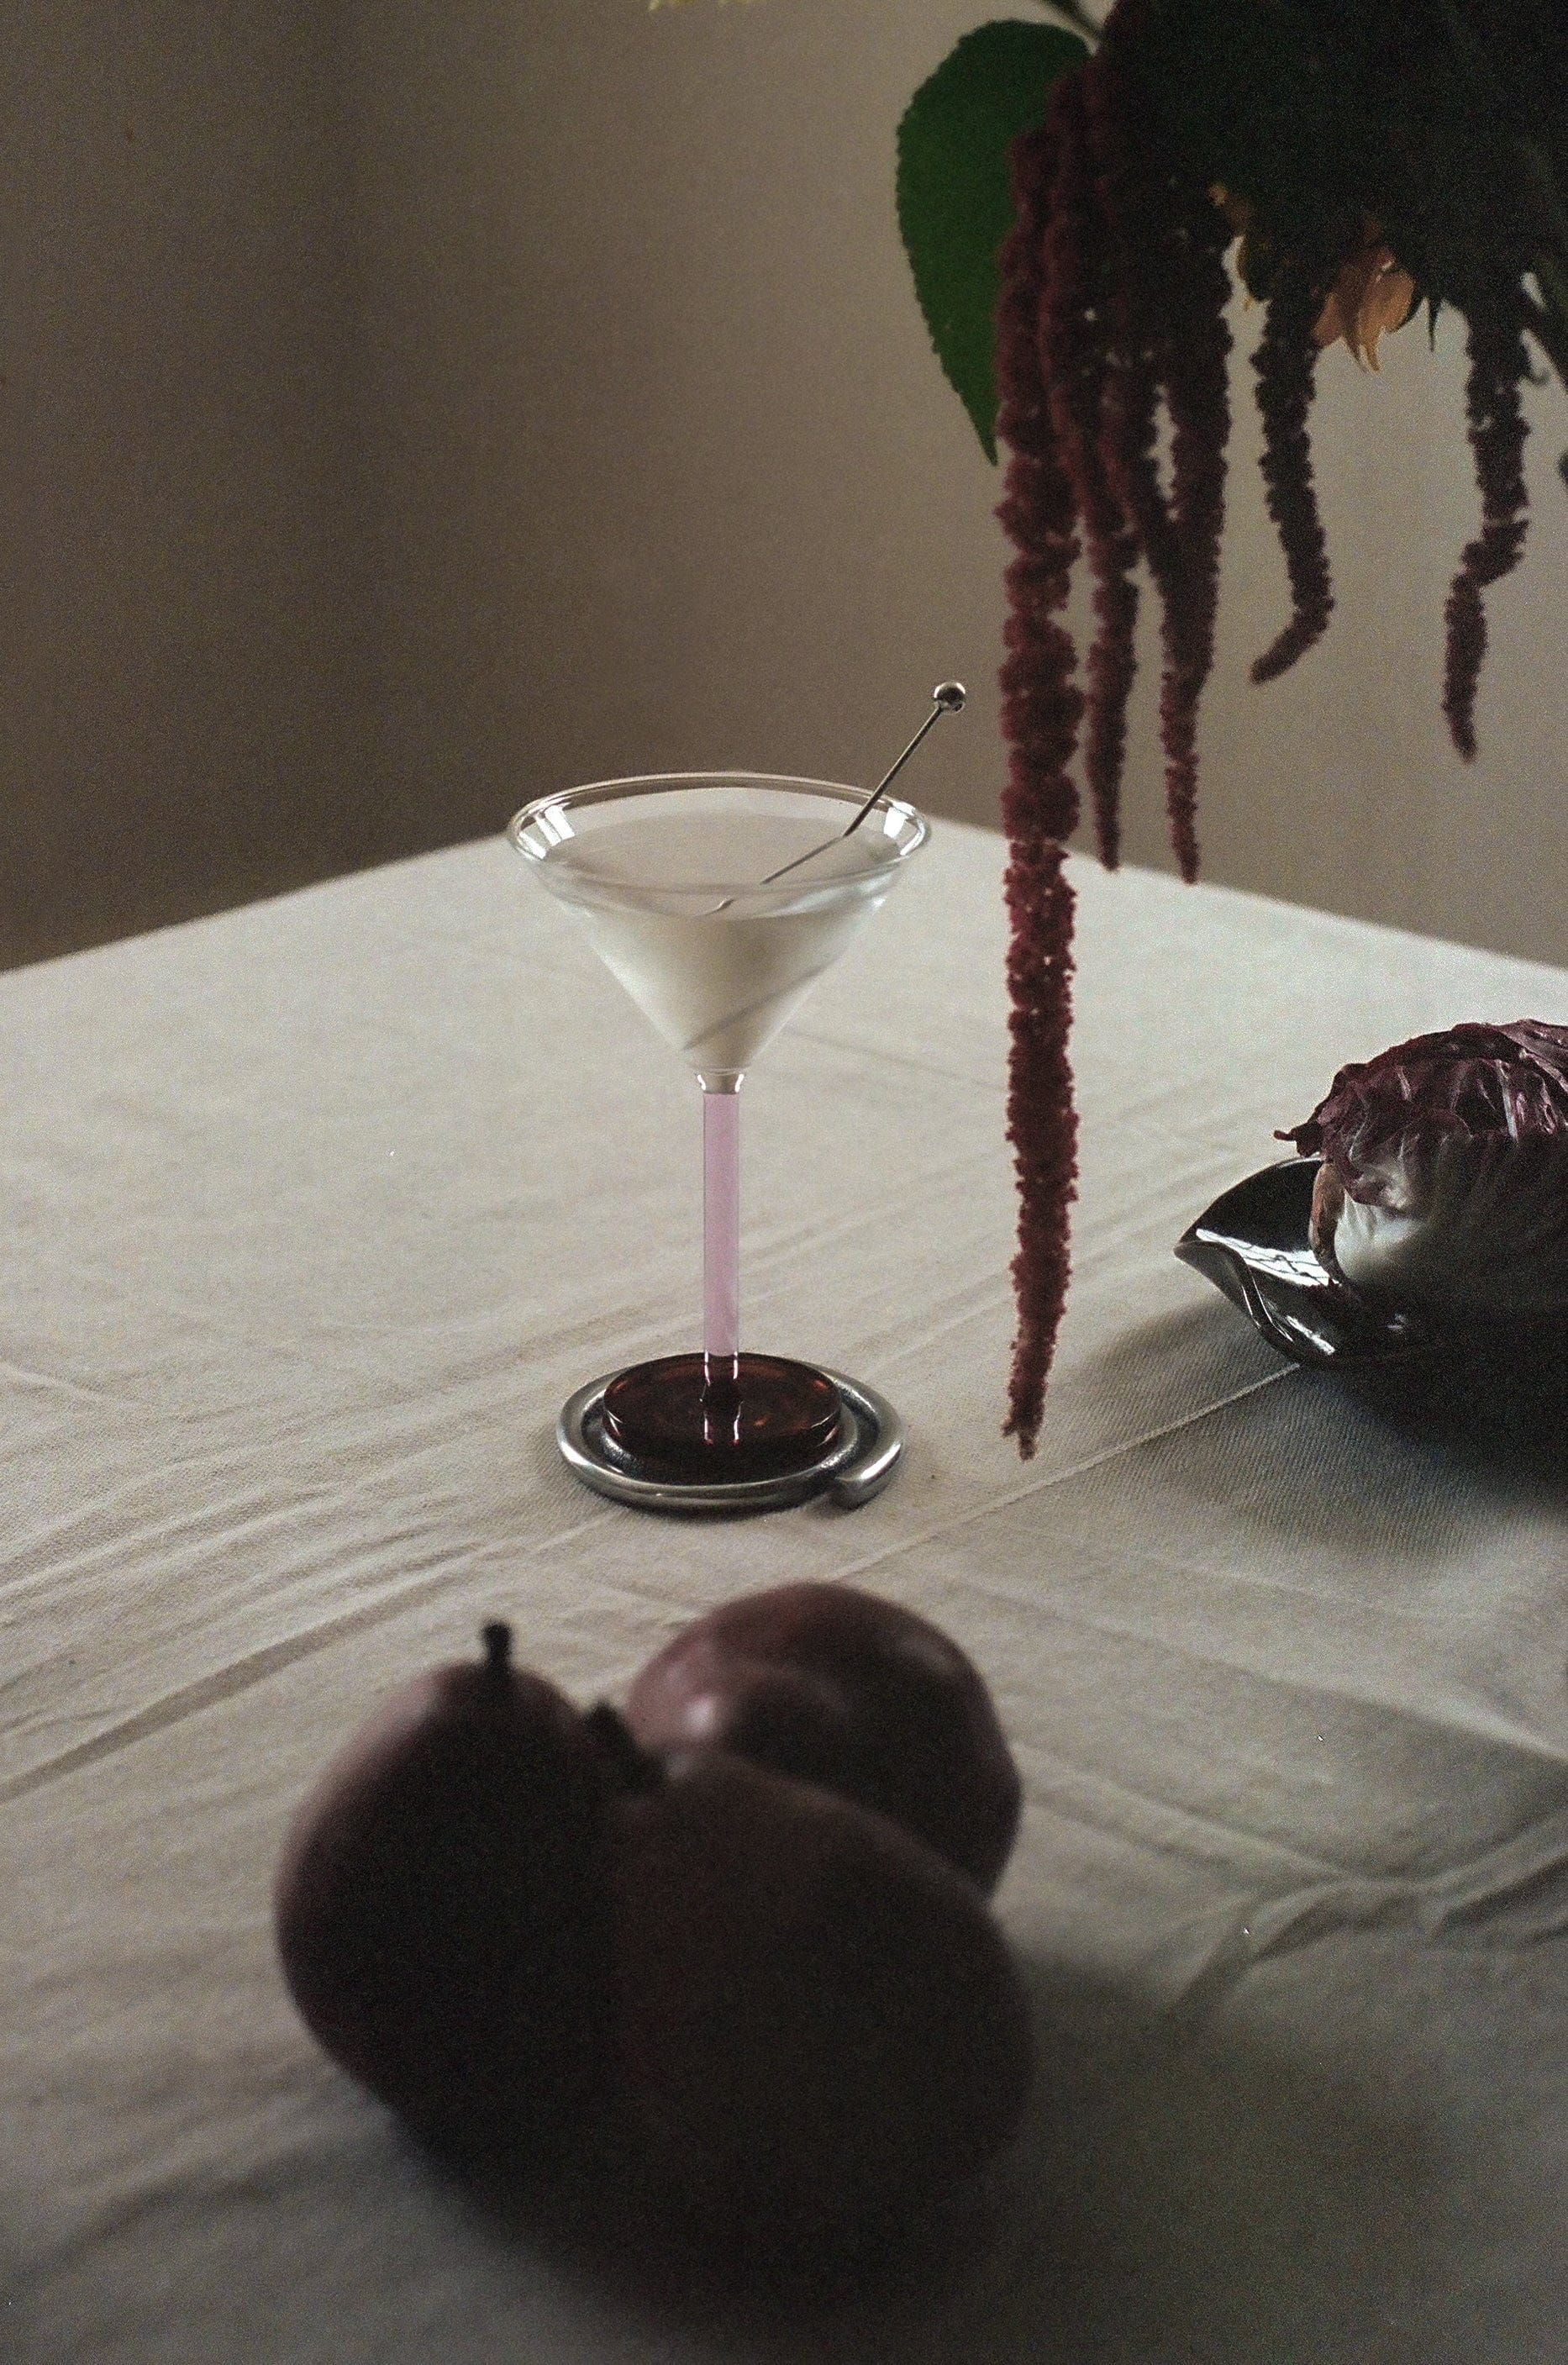 A still life featuring a Piano cocktail glass with a pink stem on a table, accompanied by three purple plums and draped amaranth flowers on the side. The table is covered with Sophie Lou Jacobsen.